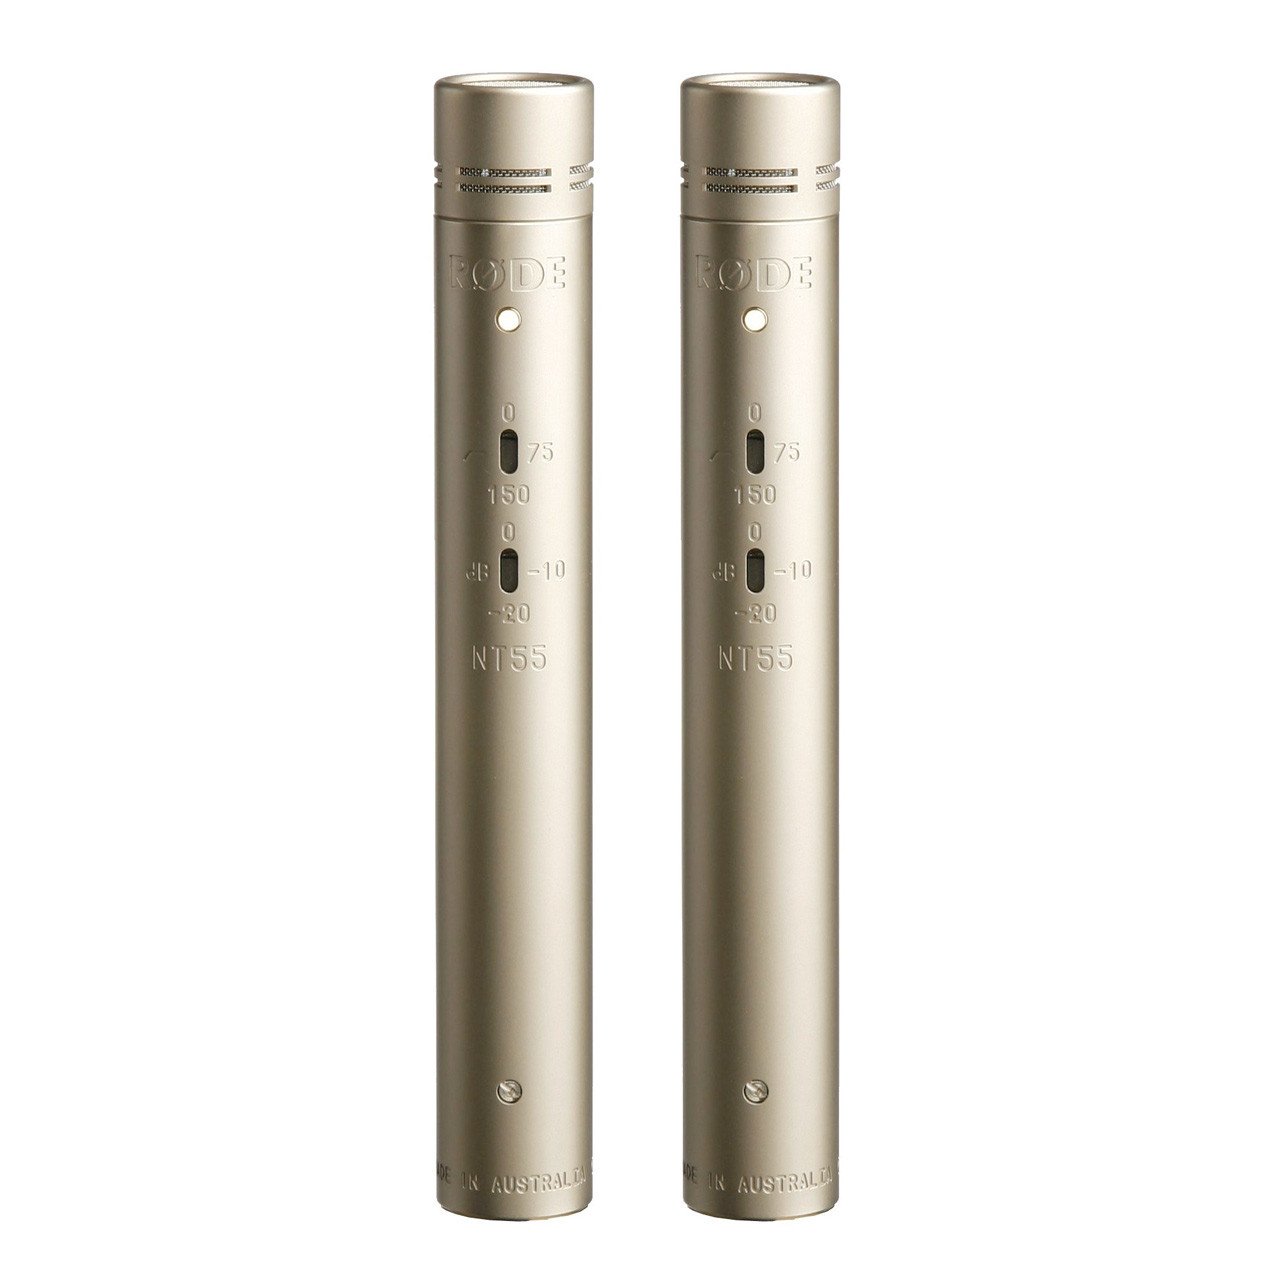 Condenser Microphones - RODE NT55 Stereo Pair Multi-Pattern 1/2" Condenser Microphones